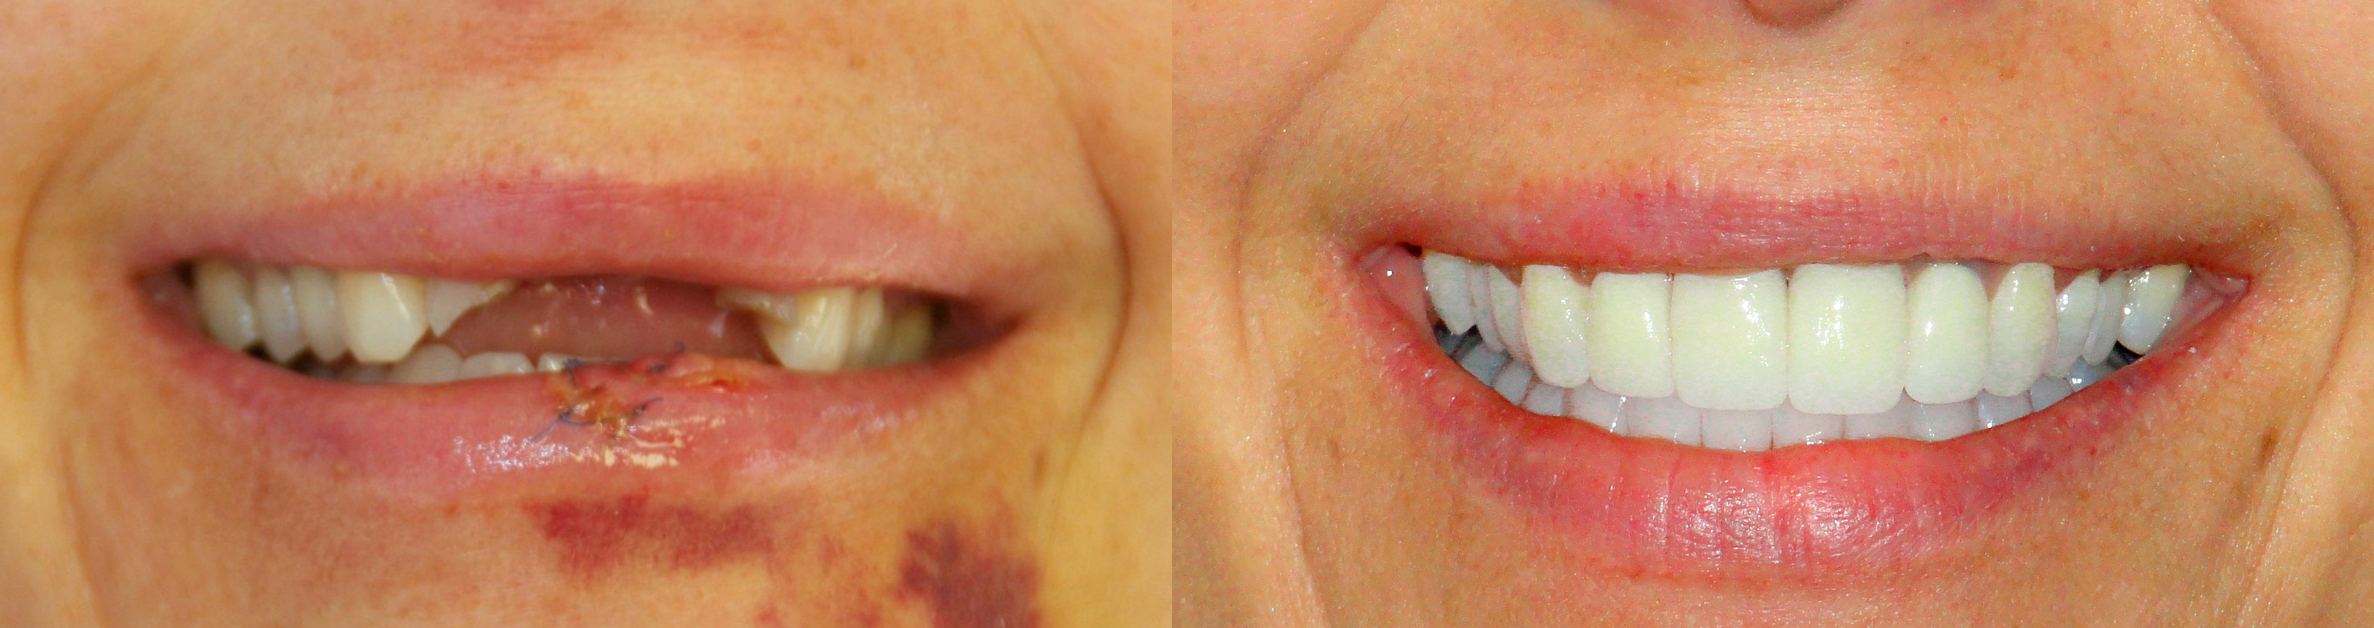  This patient came to Dr. Ingram after an unfortunate accident left her front teeth destroyed. 